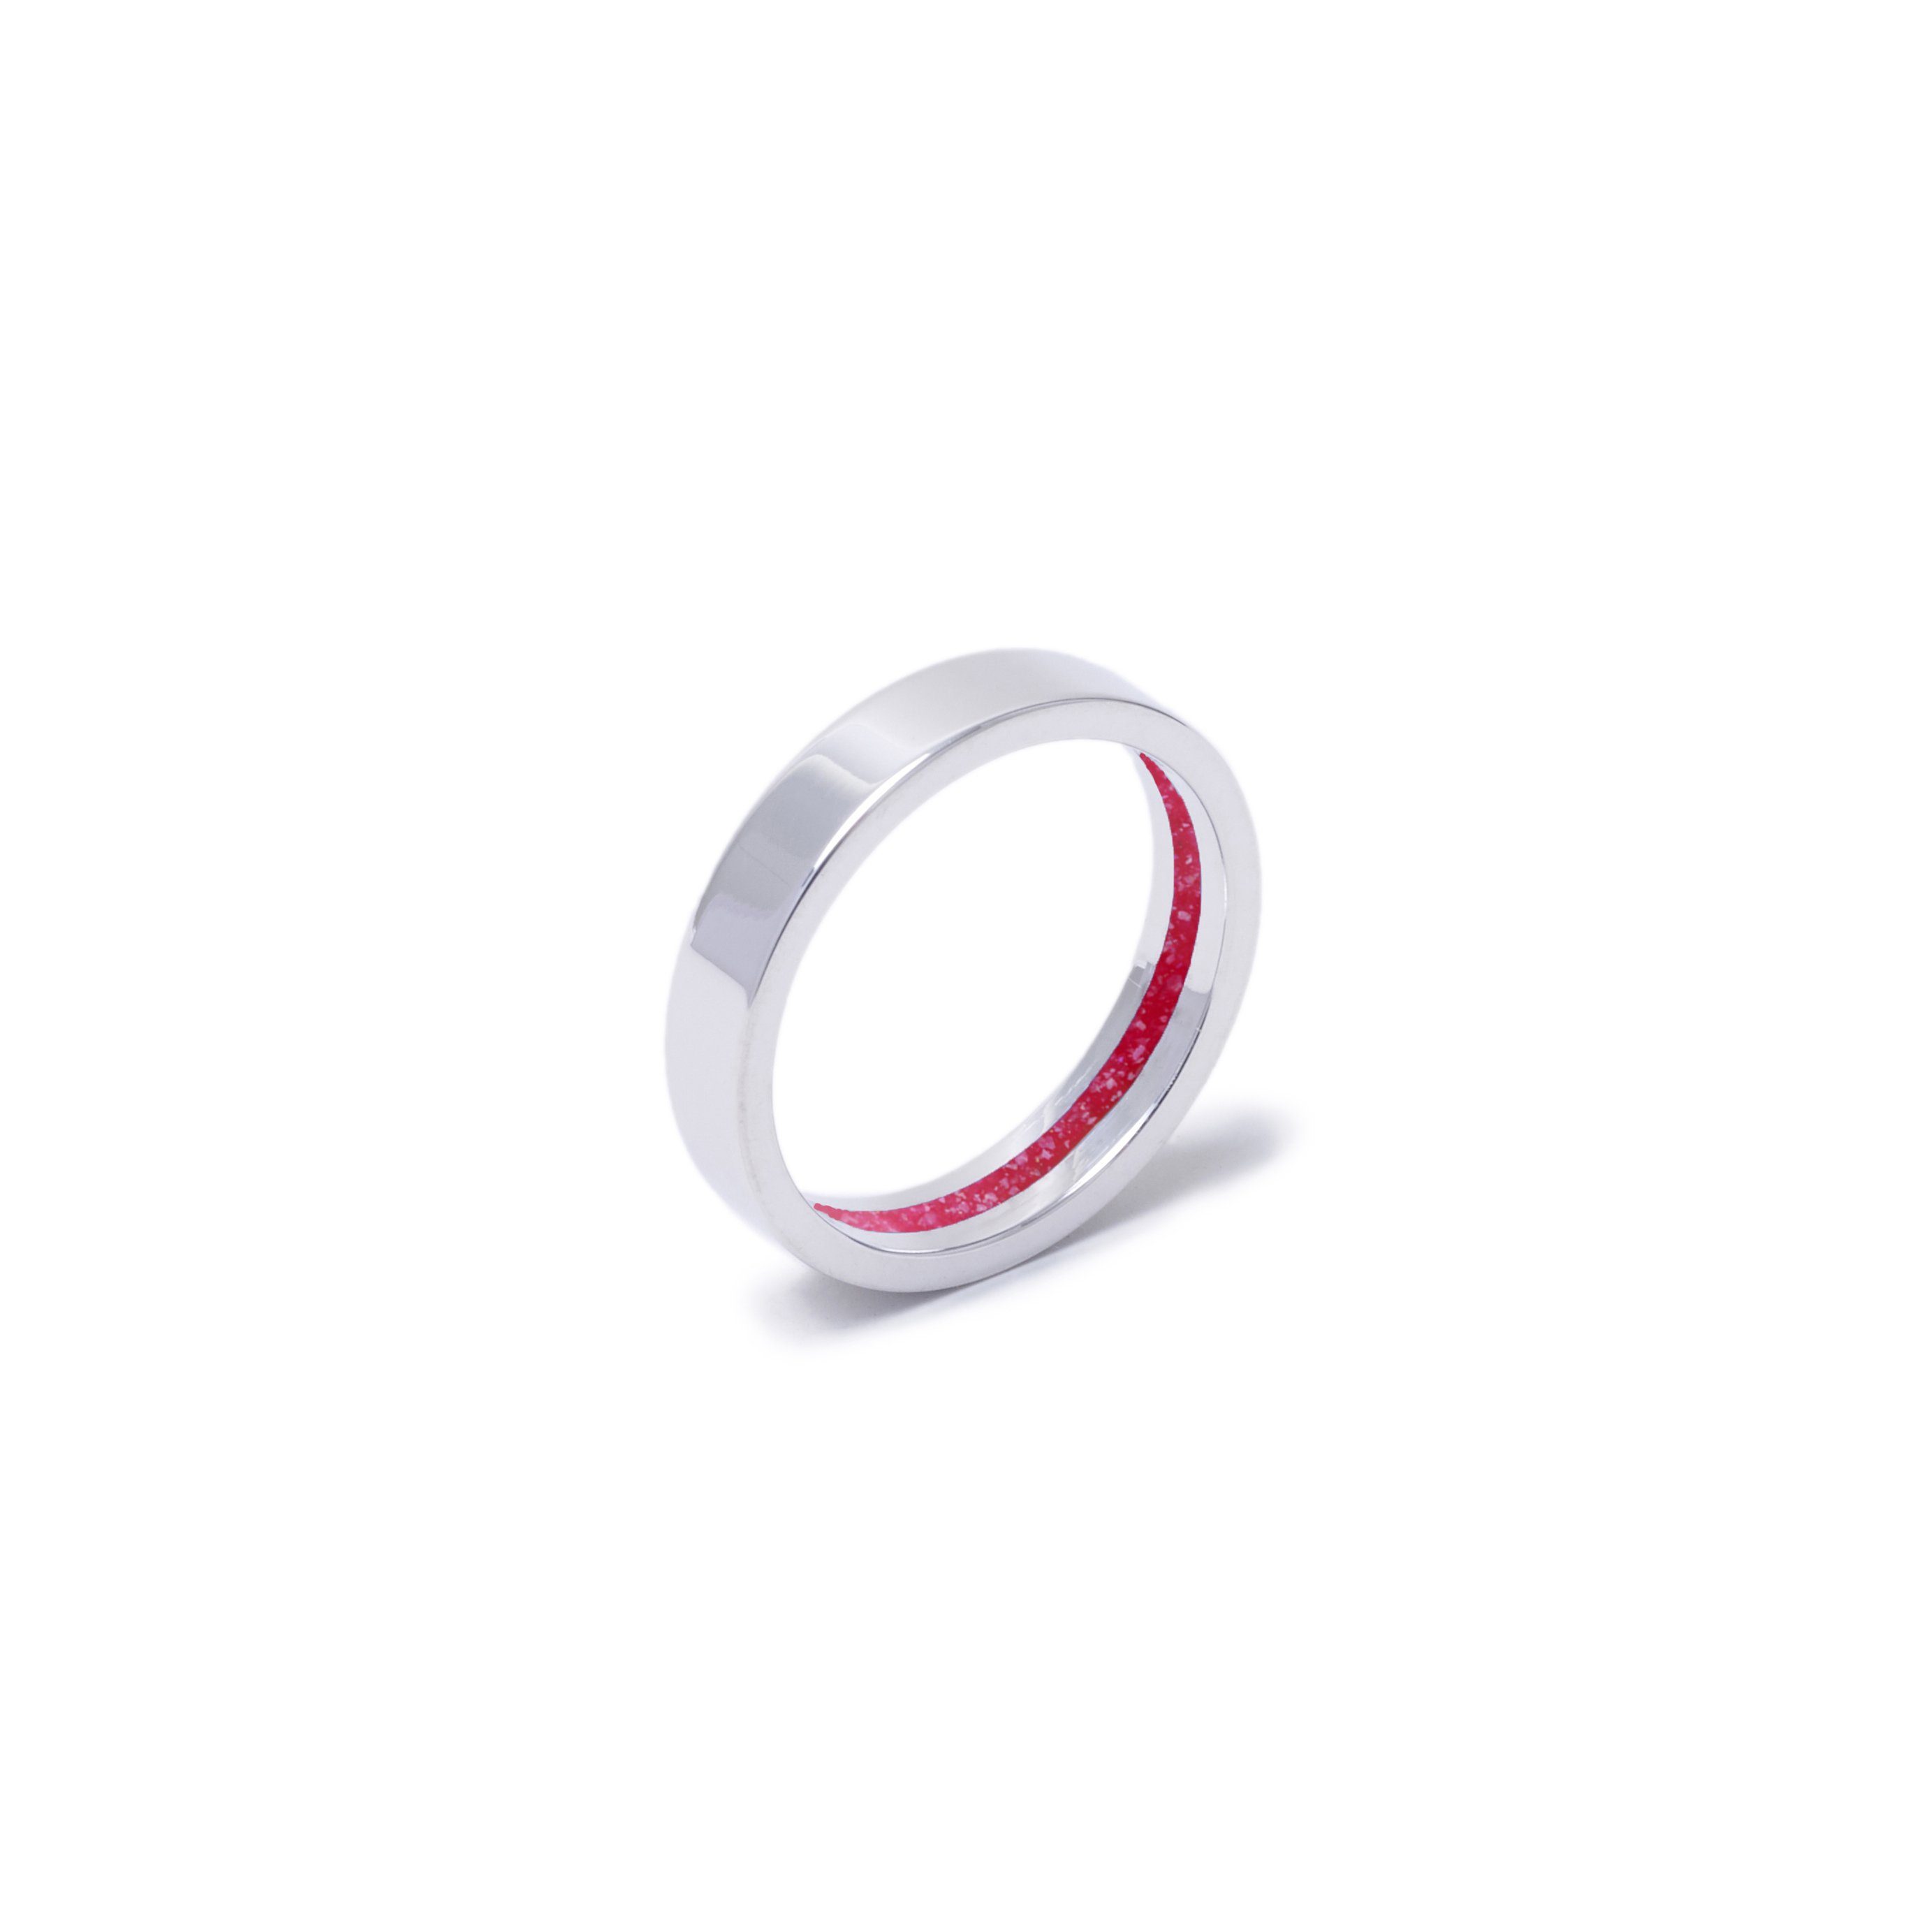 Everence Ring, 10k White Gold everence.life 4mm Scarlet 